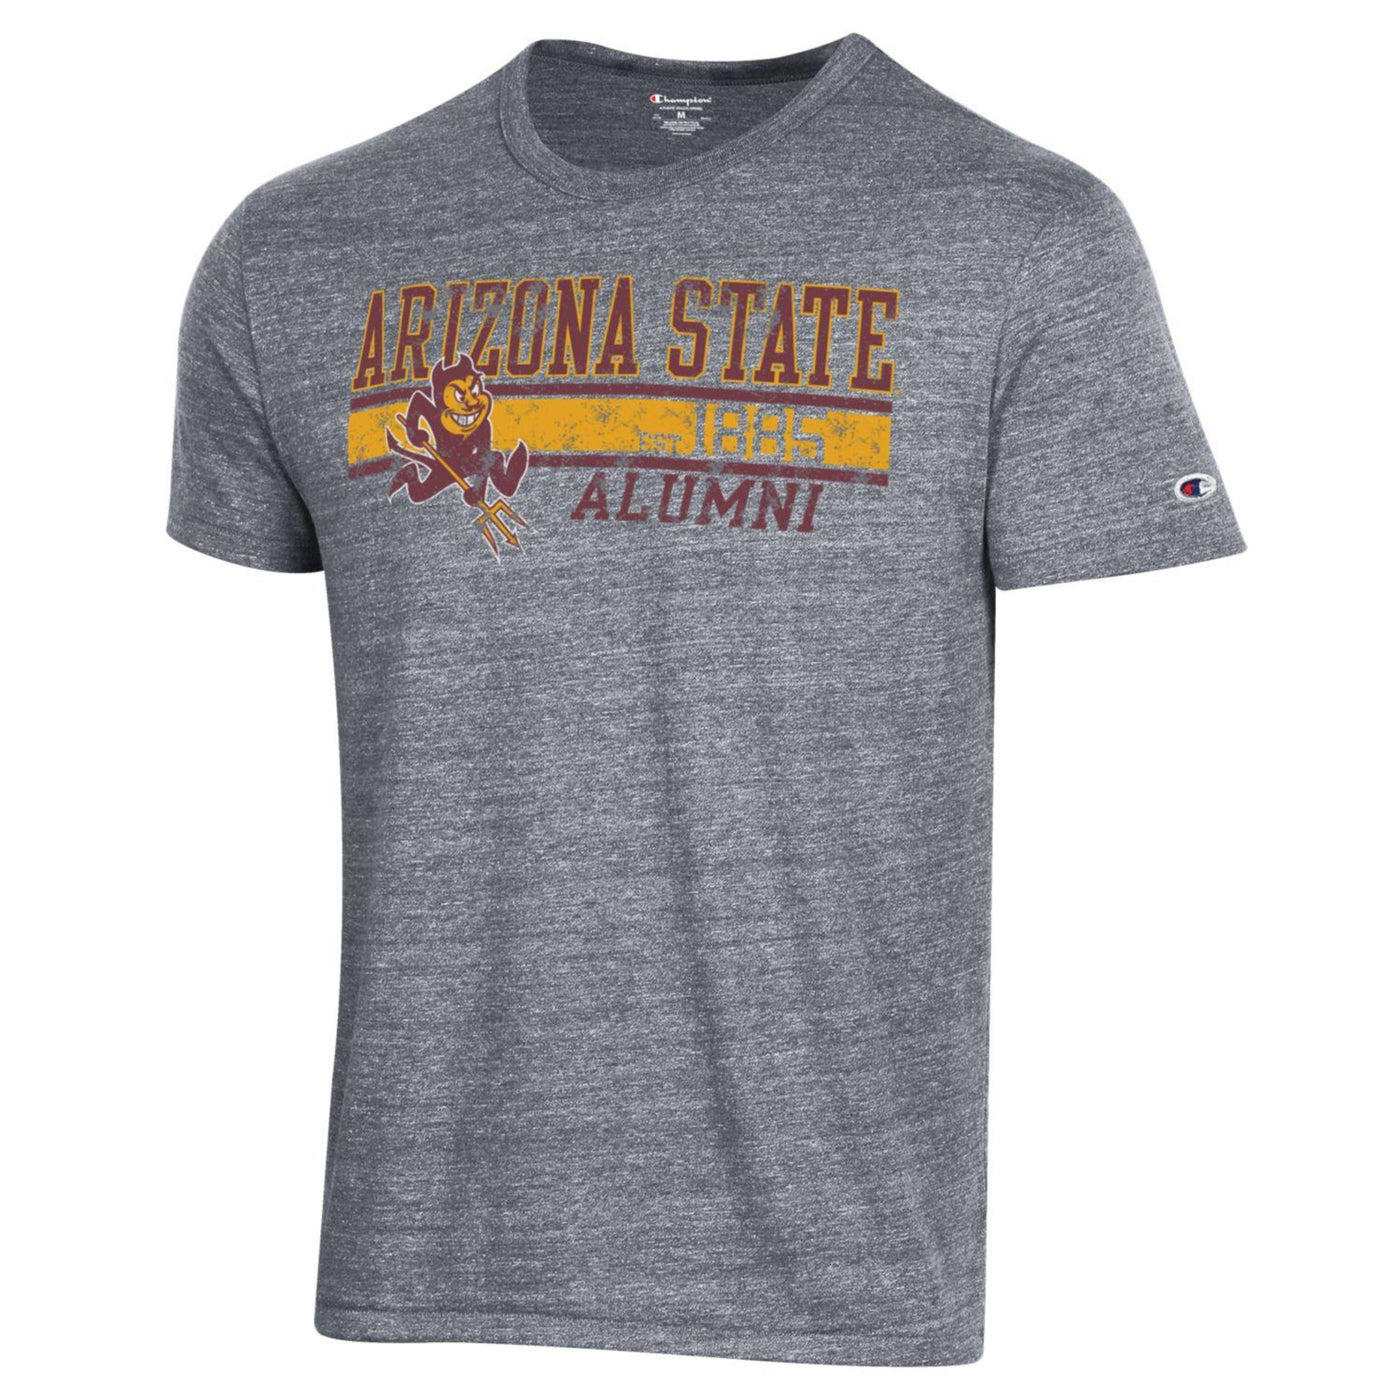 ASU gray Champion tee in heather gray with 'Arizona State' '1885' 'Alumni' lettering next to Sparky